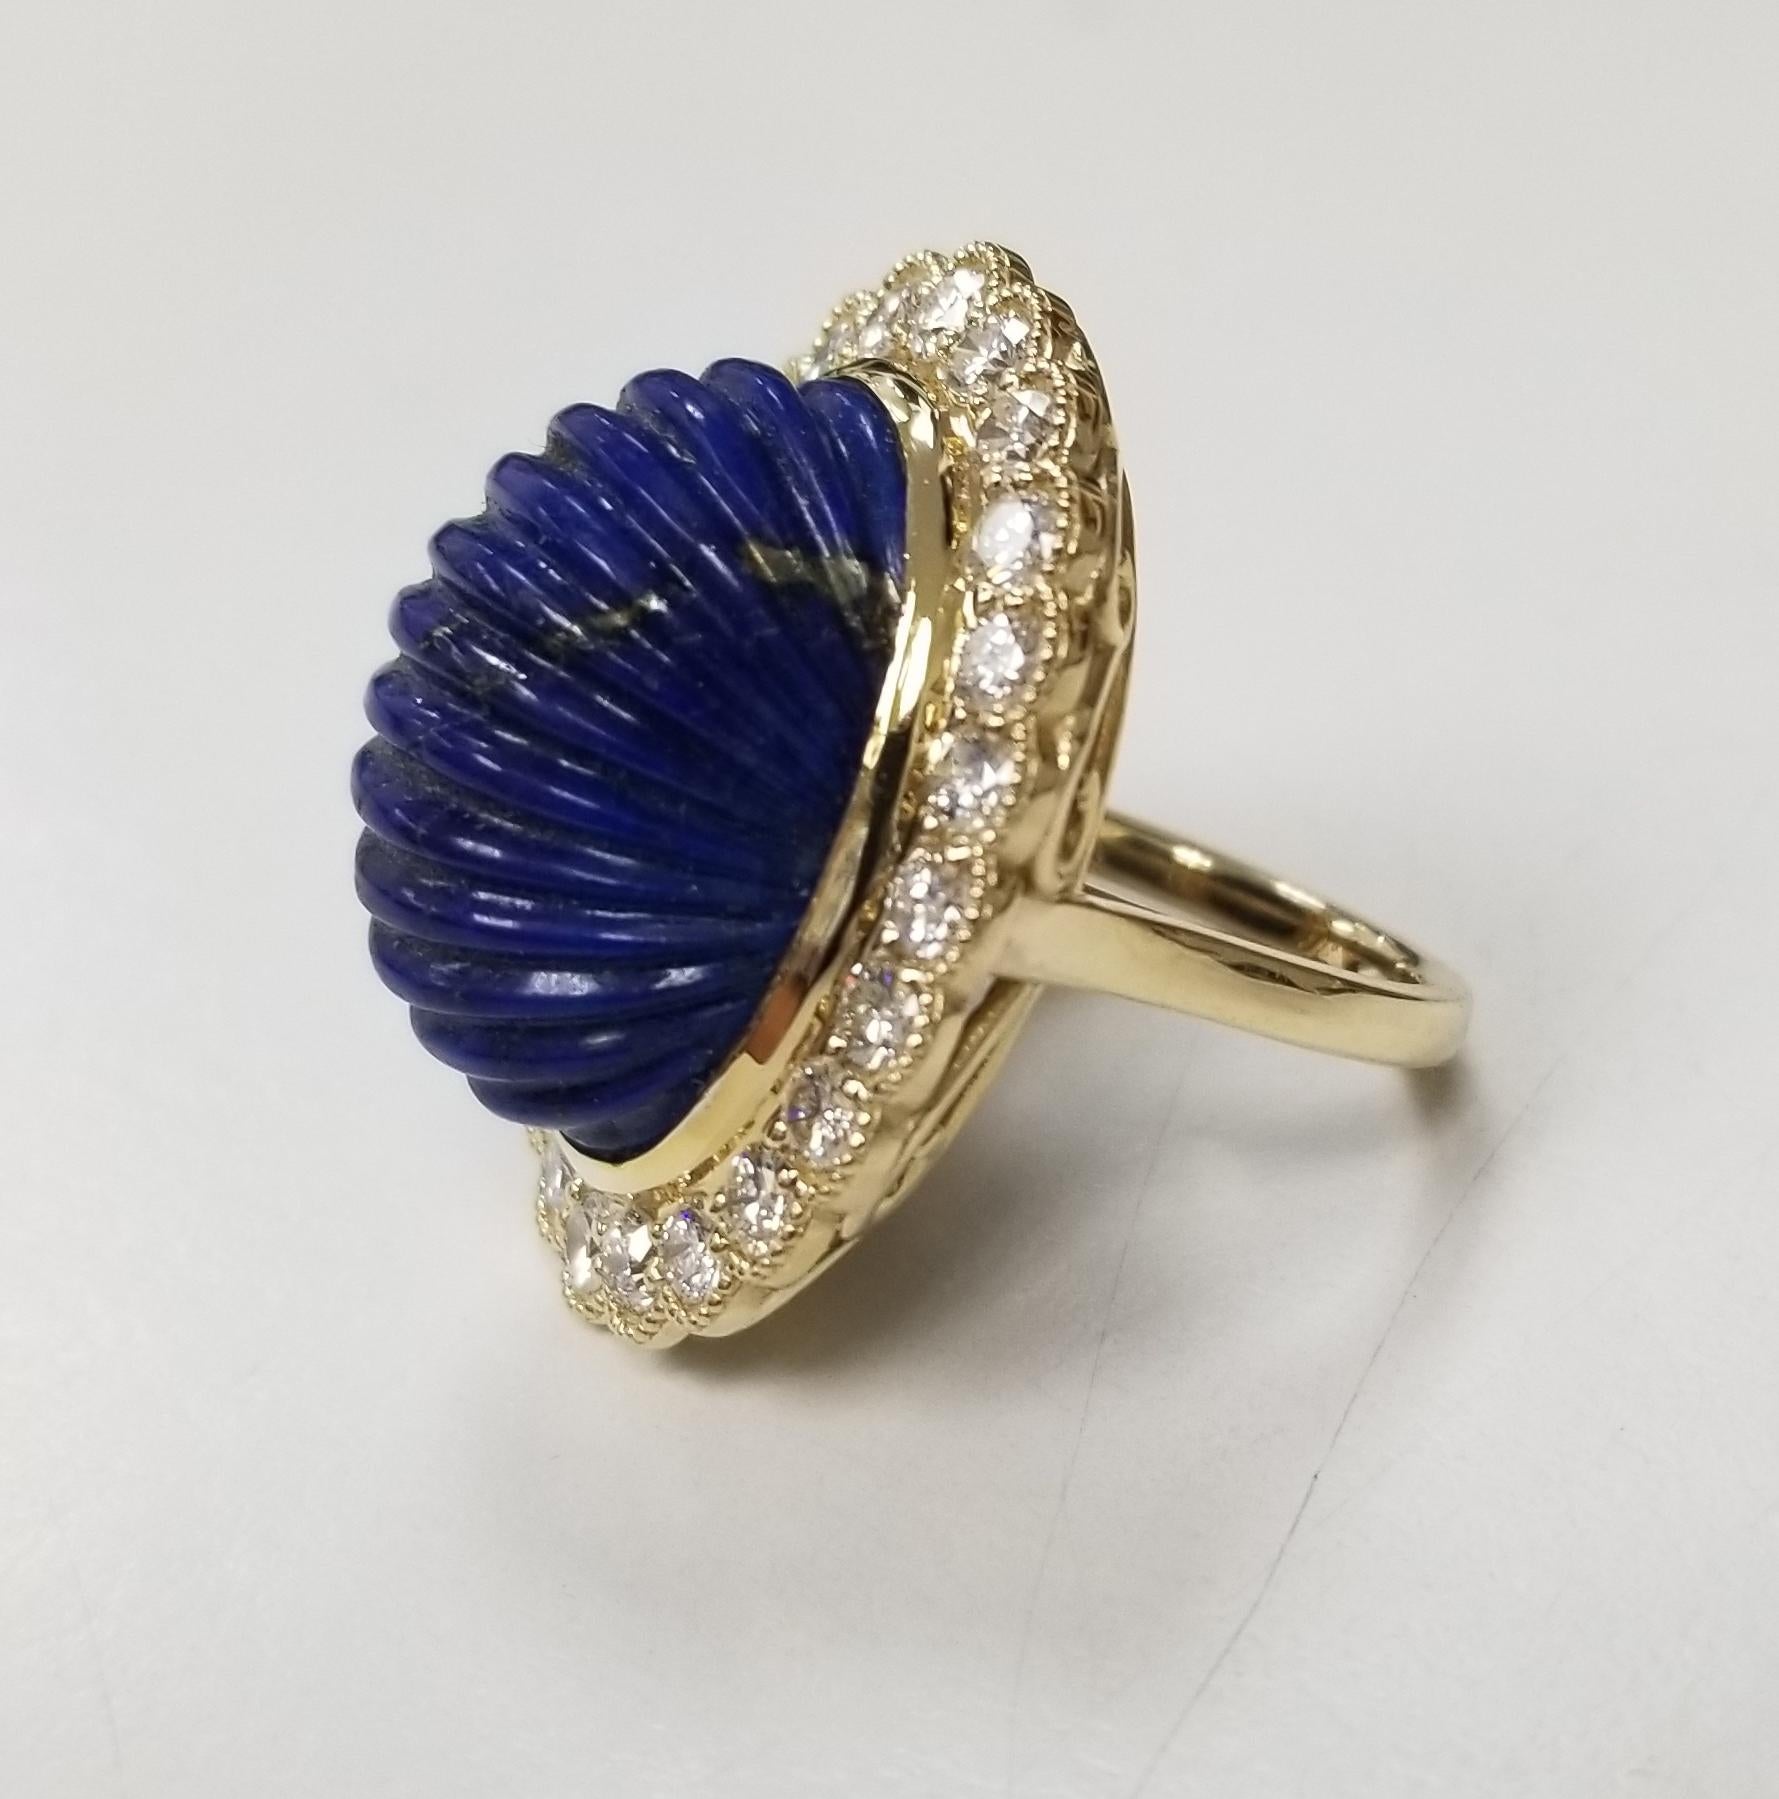  This is an 14k Yellow gold Lapis lazuli and diamond ring. The main stone has the beautiful carved Lapis lazuli and is 28.60 carat weight. It has a 24pcs round diamonds and has an approximately 2.35 carat total weight, G color and VS2 clarity. Its